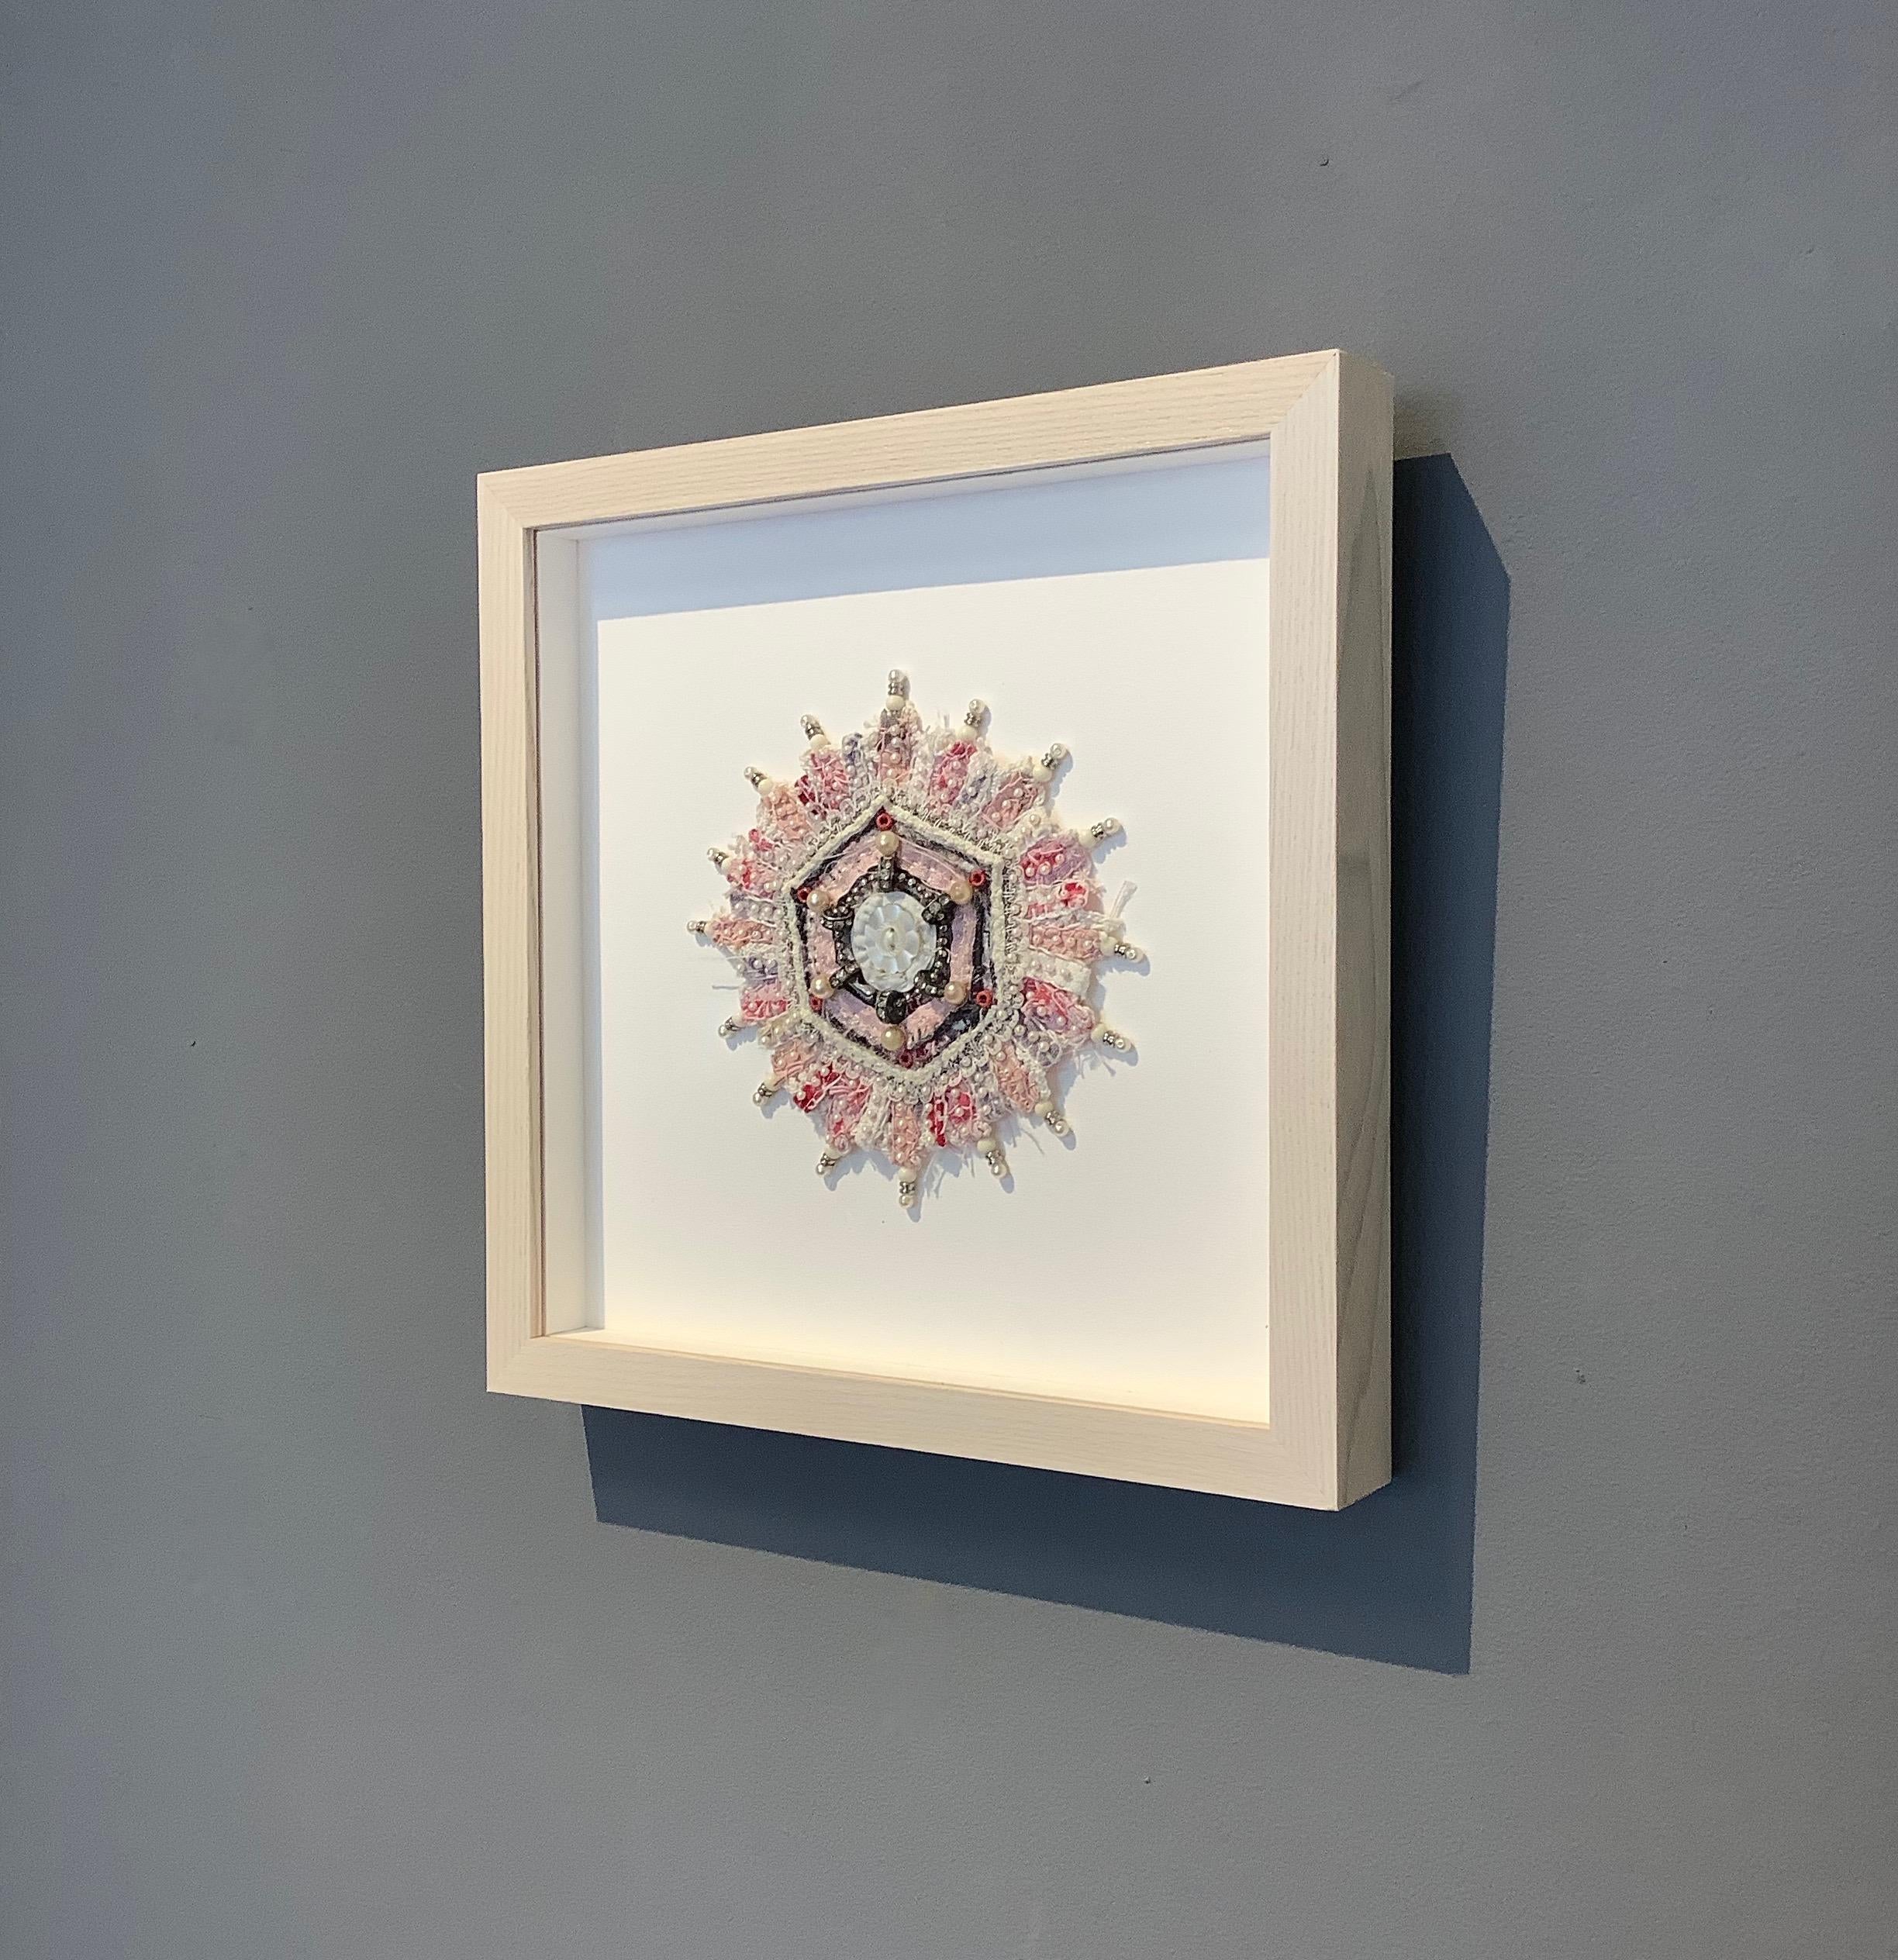 This mixed media mandala by Donna Sharrett is composed of guitar string ball-ends, clothing, needlework, jewelry, and thread, and is framed in a square 10 x 10 inch light natural wood float frame (5 x 5 inches unframed). 

Rhinestone studded beads